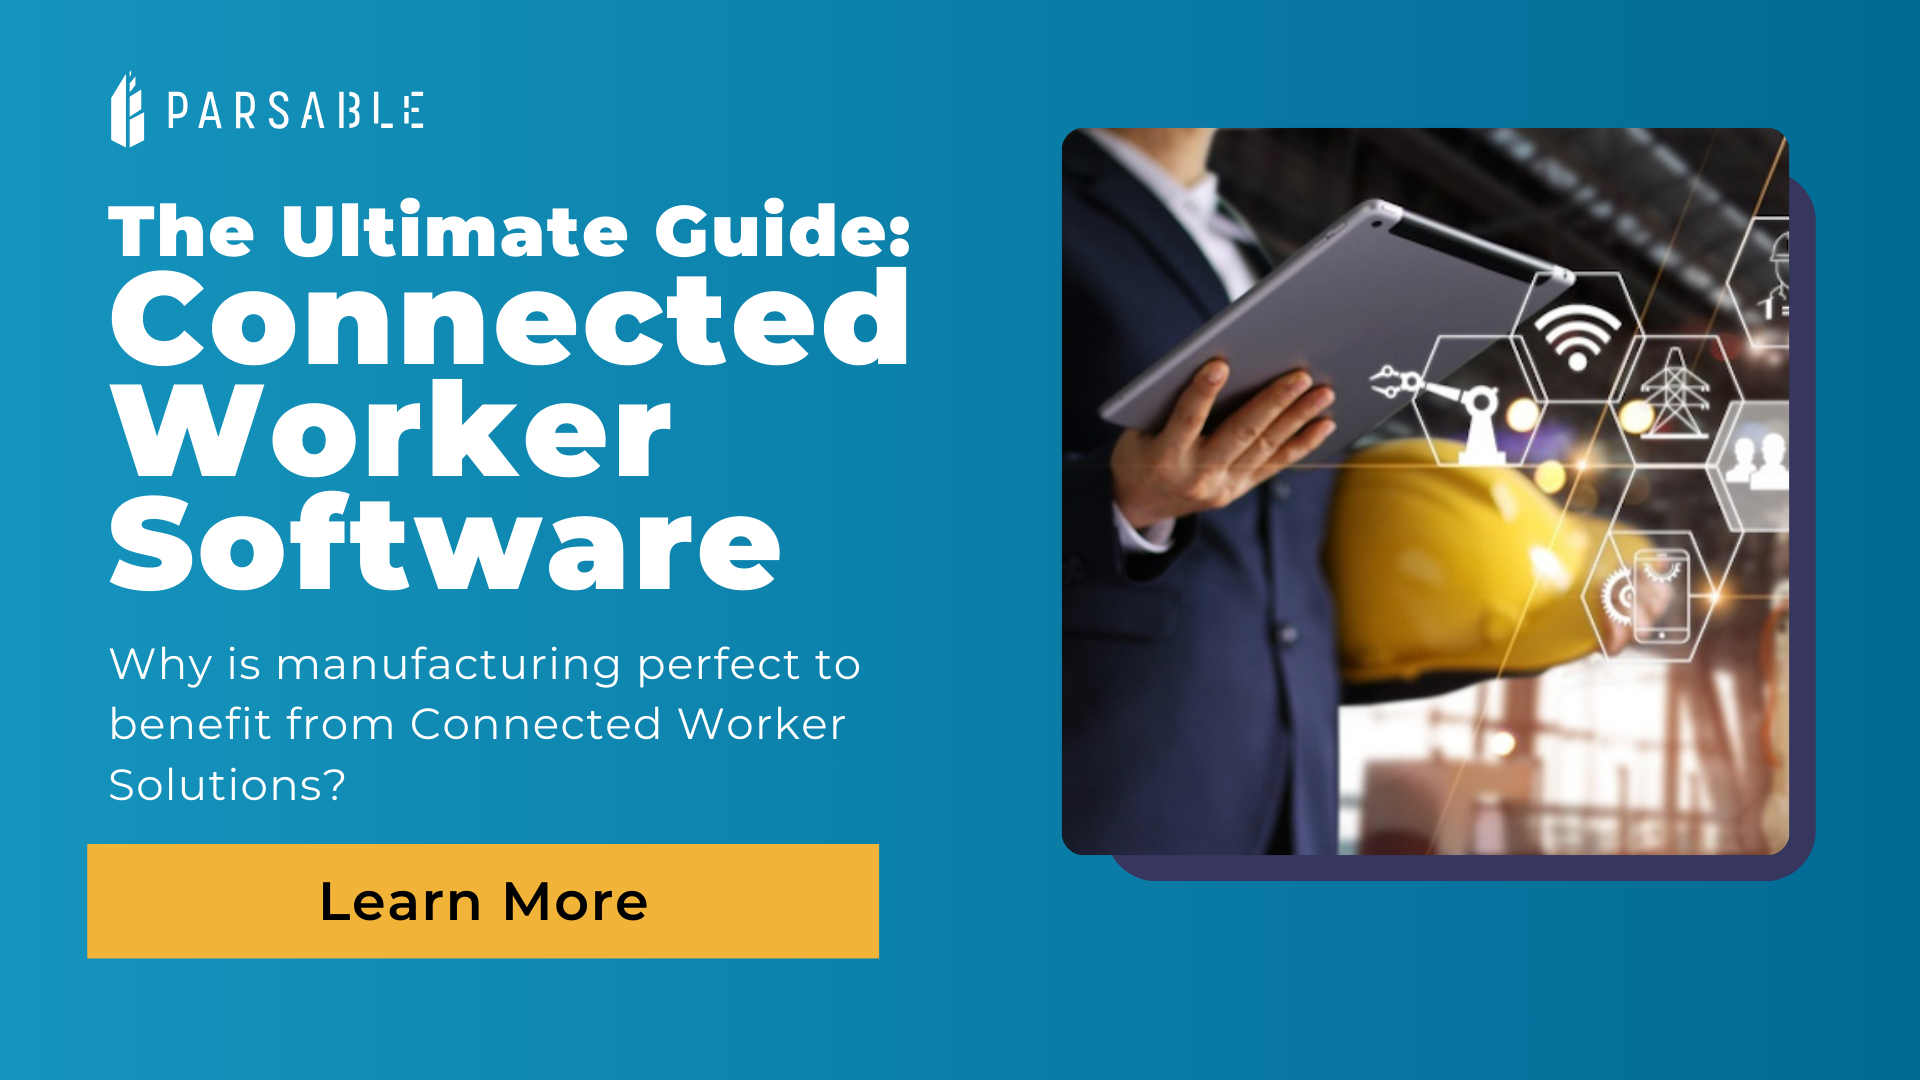 The Ultimate Guide: Connected Worker Software